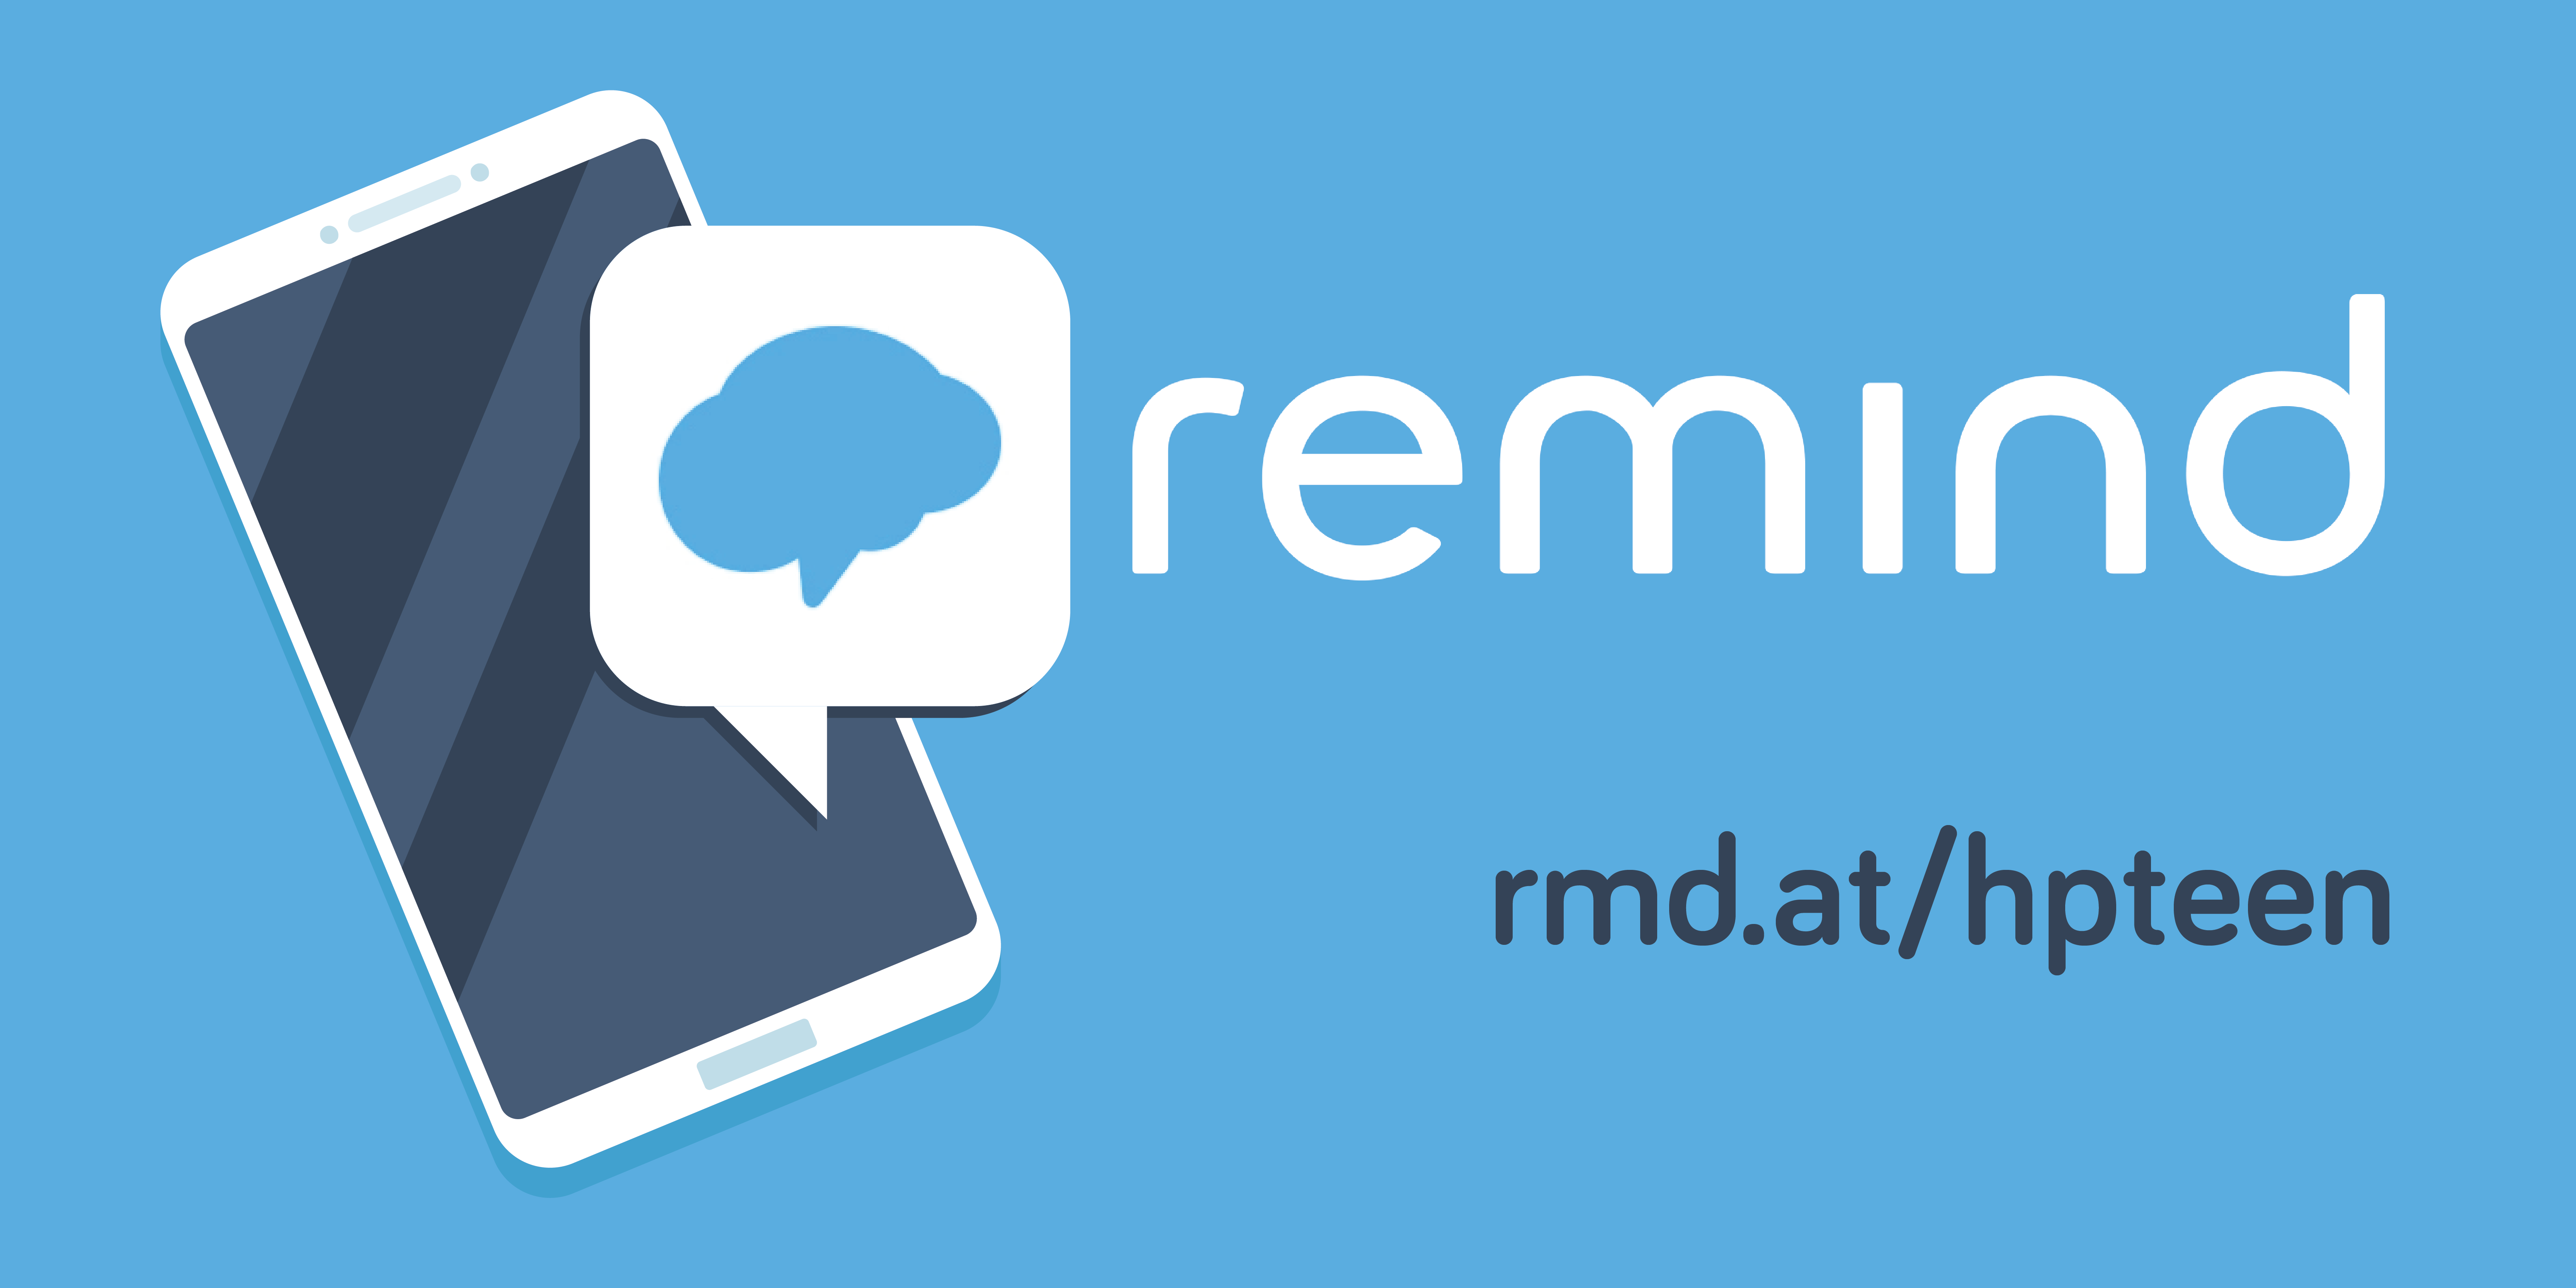 Remind banner showing smart phone and the url rmd.at/hpteen